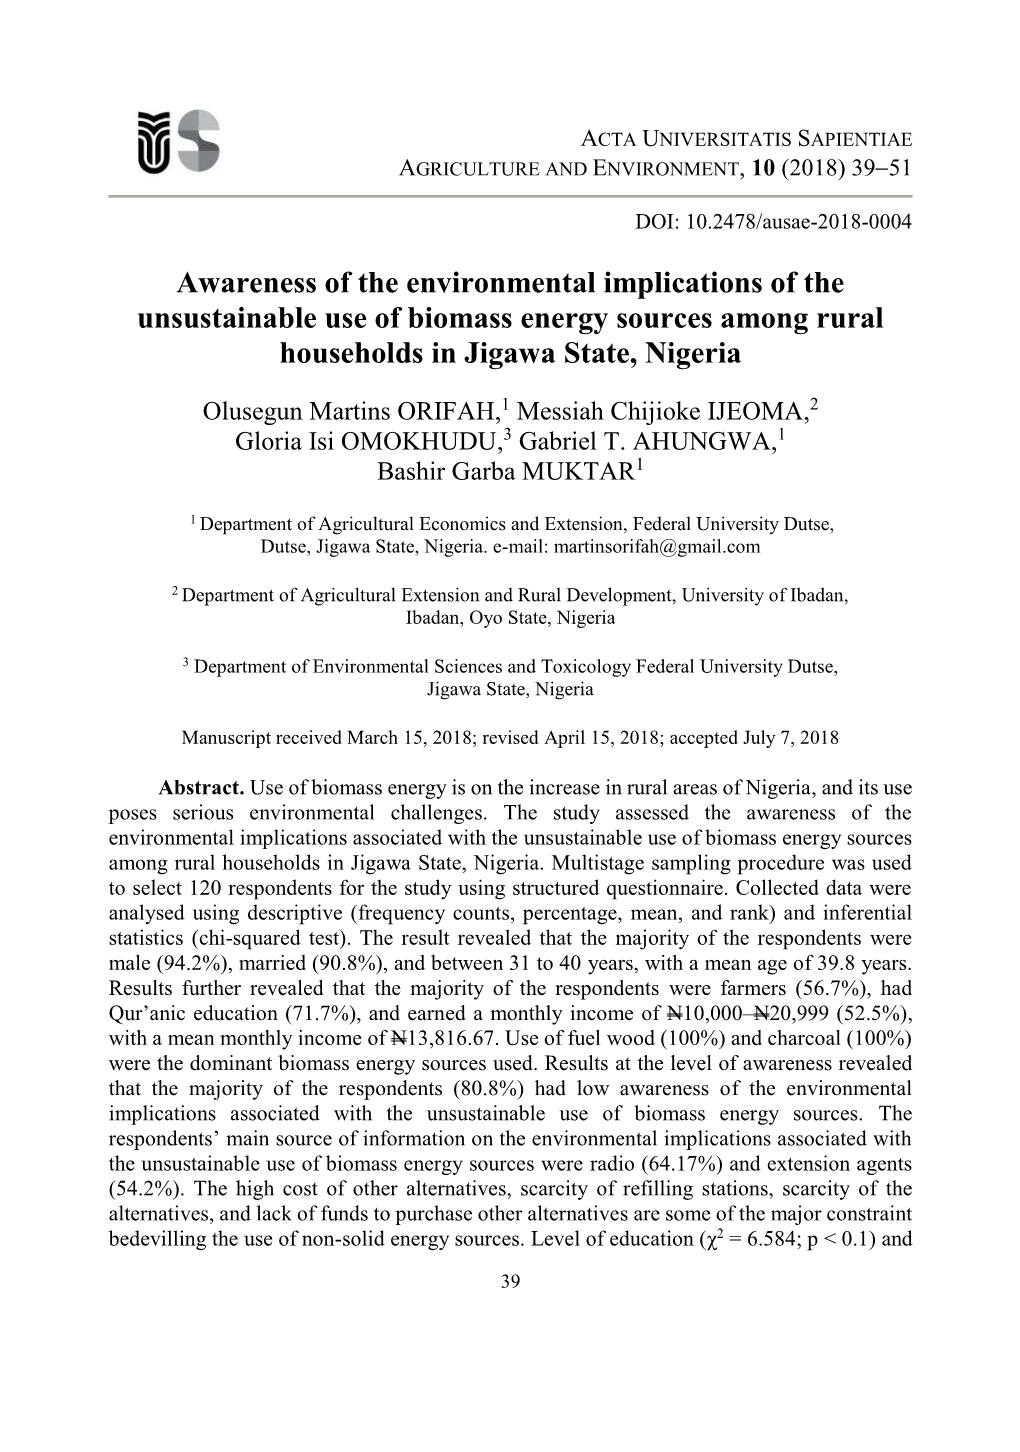 Awareness of the Environmental Implications of the Unsustainable Use of Biomass Energy Sources Among Rural Households in Jigawa State, Nigeria